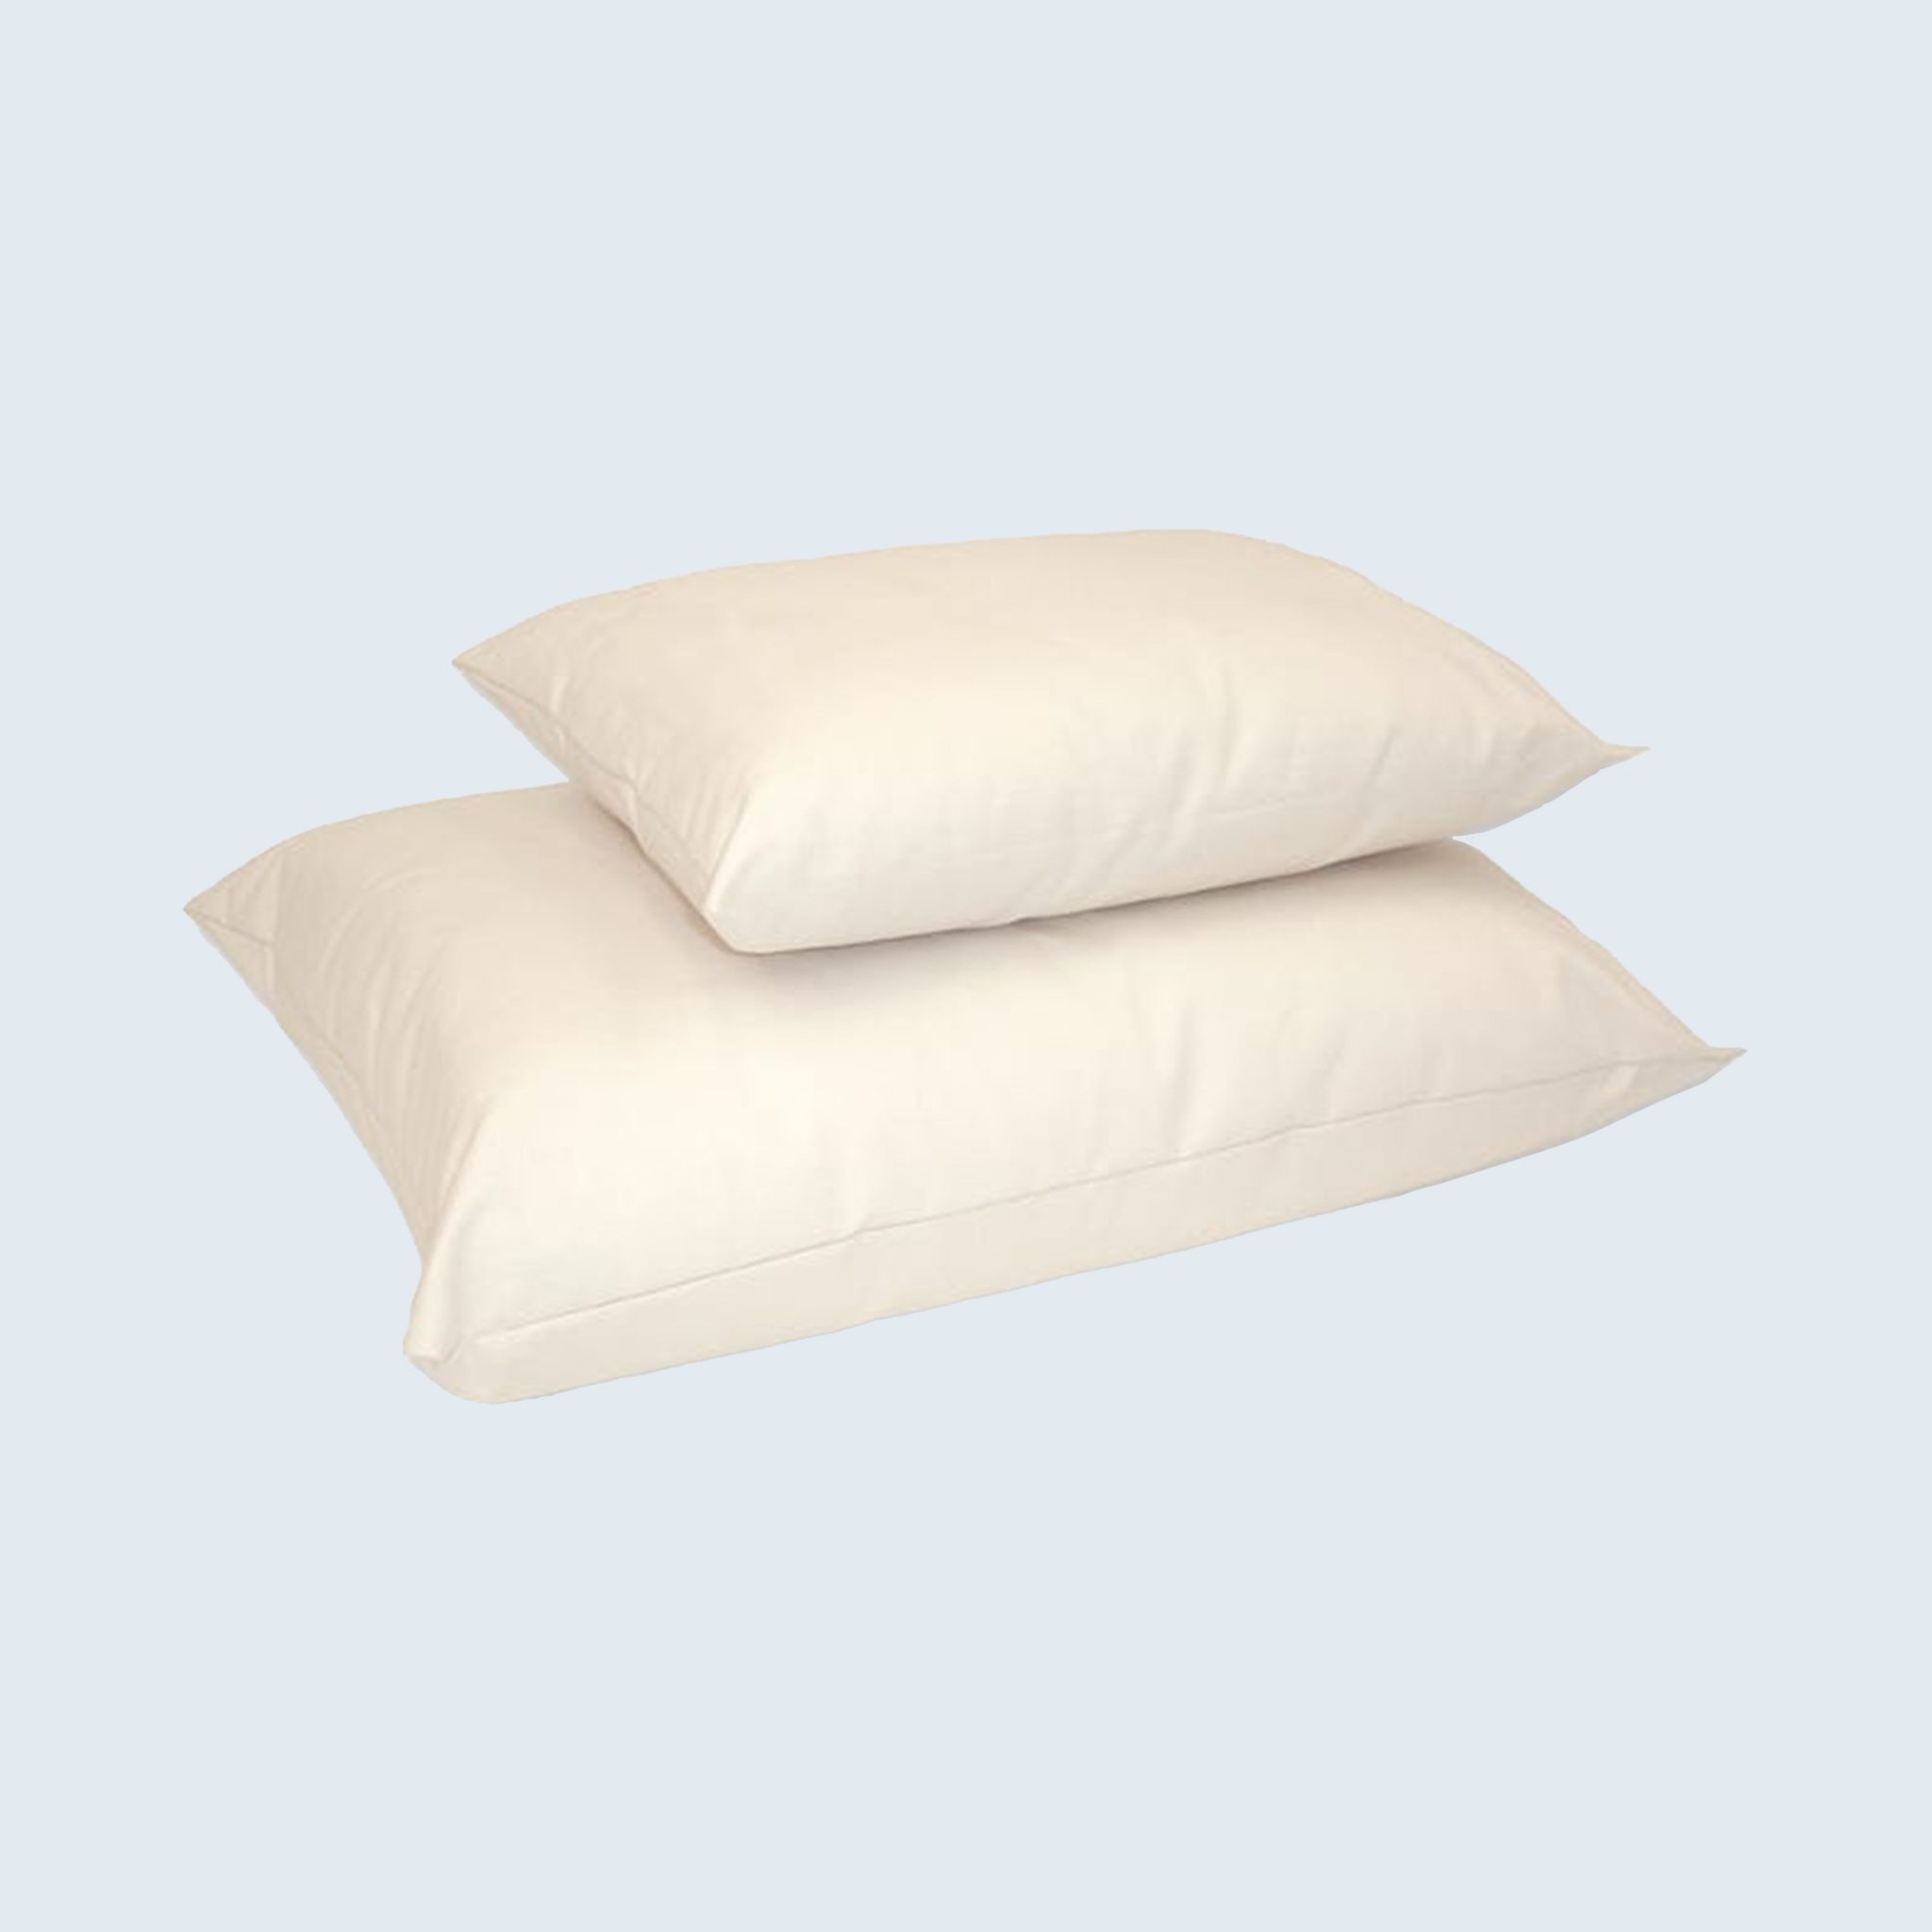 13 Best Pillows for Side Sleepers 2021 | Memory Foam, Down, Organic